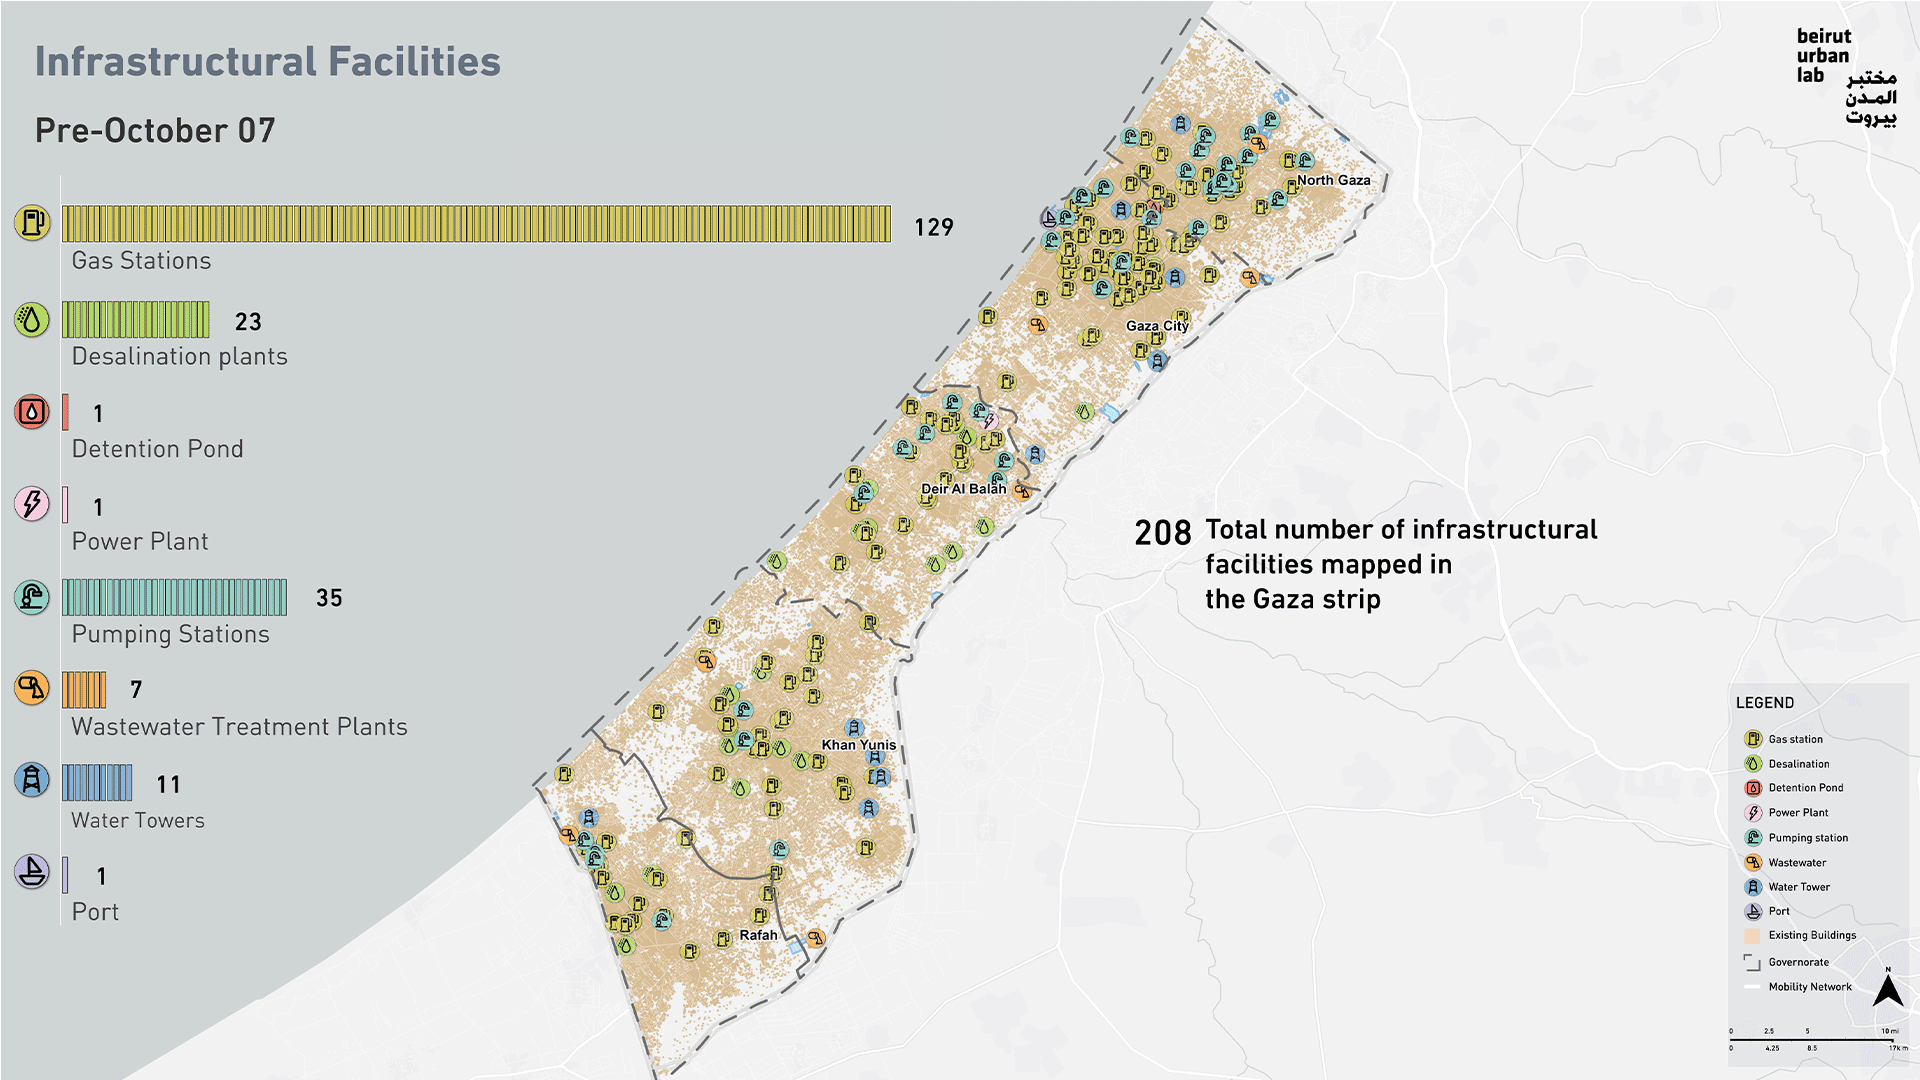 Damages to infrastructural facilities in Gaza. Source: Beirut Urban Lab based on data from UNOSAT